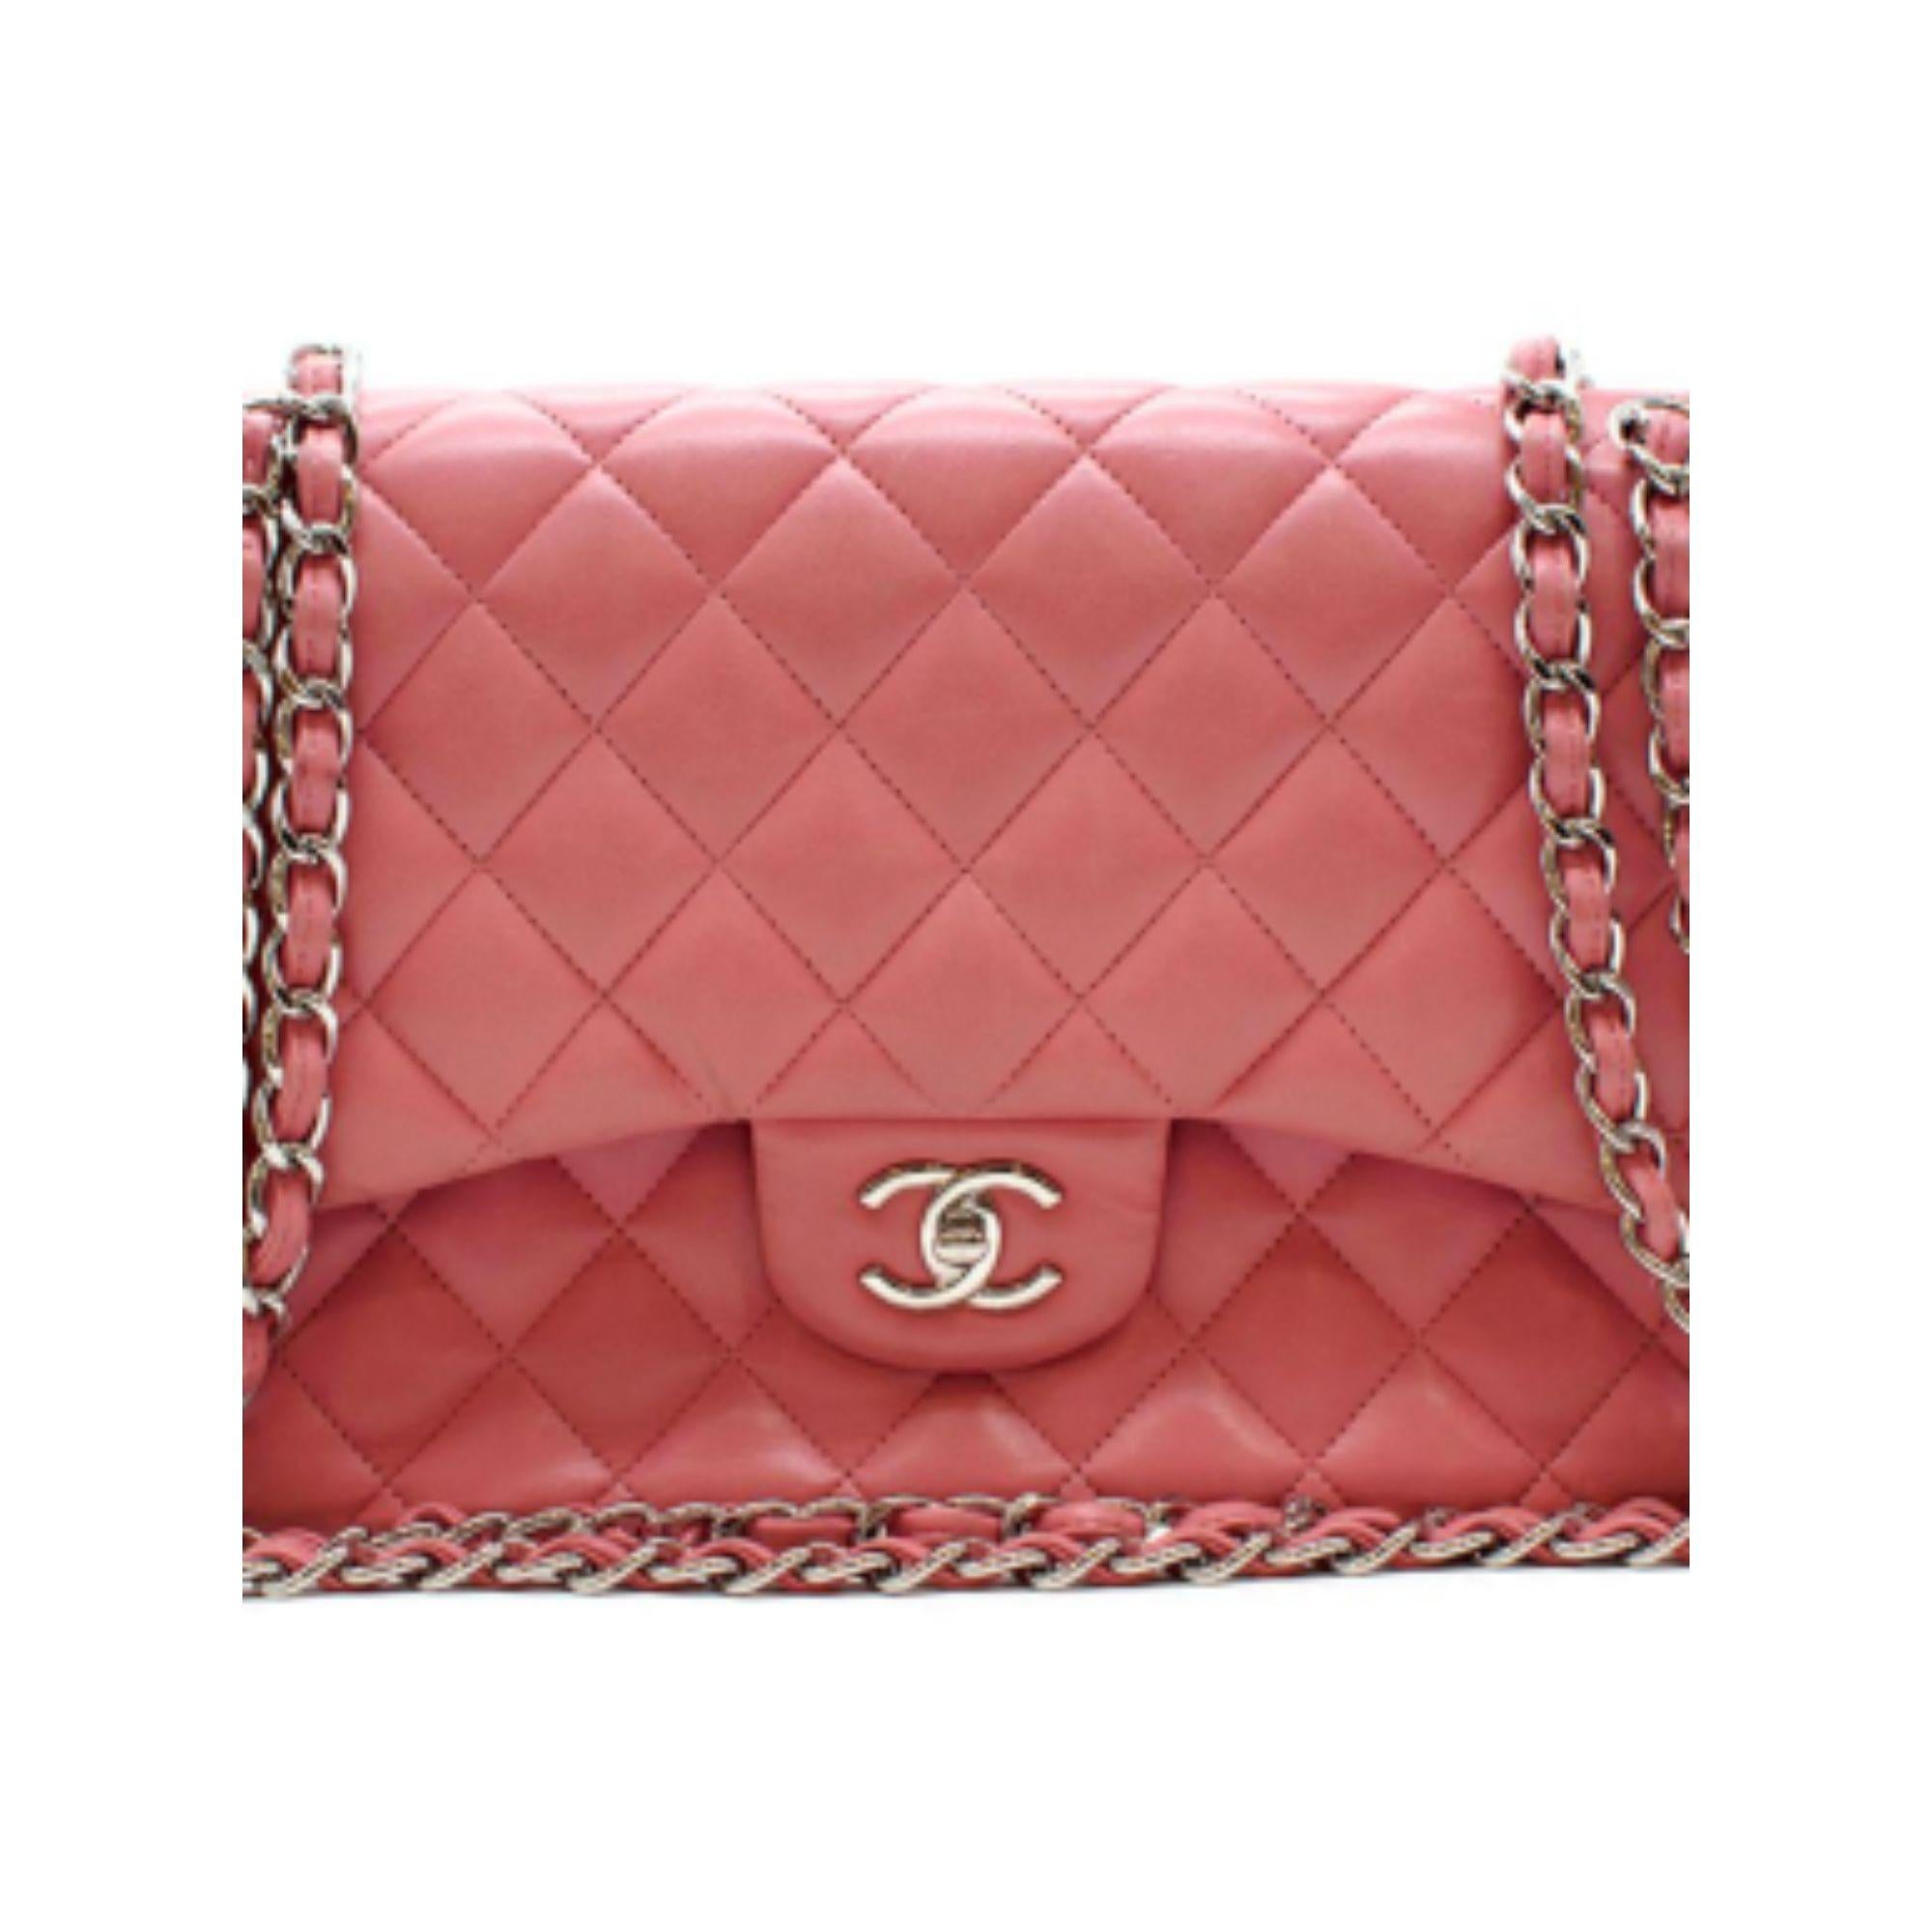 Chanel Pink Quilted Jumbo Double Flap Bag

HEWI Second Life! A Chance to purchase a well-loved Chanel bag that can be restored! A great investment opportunity. 

The bag has been well loved, this can be seen in the images however, with a restoration